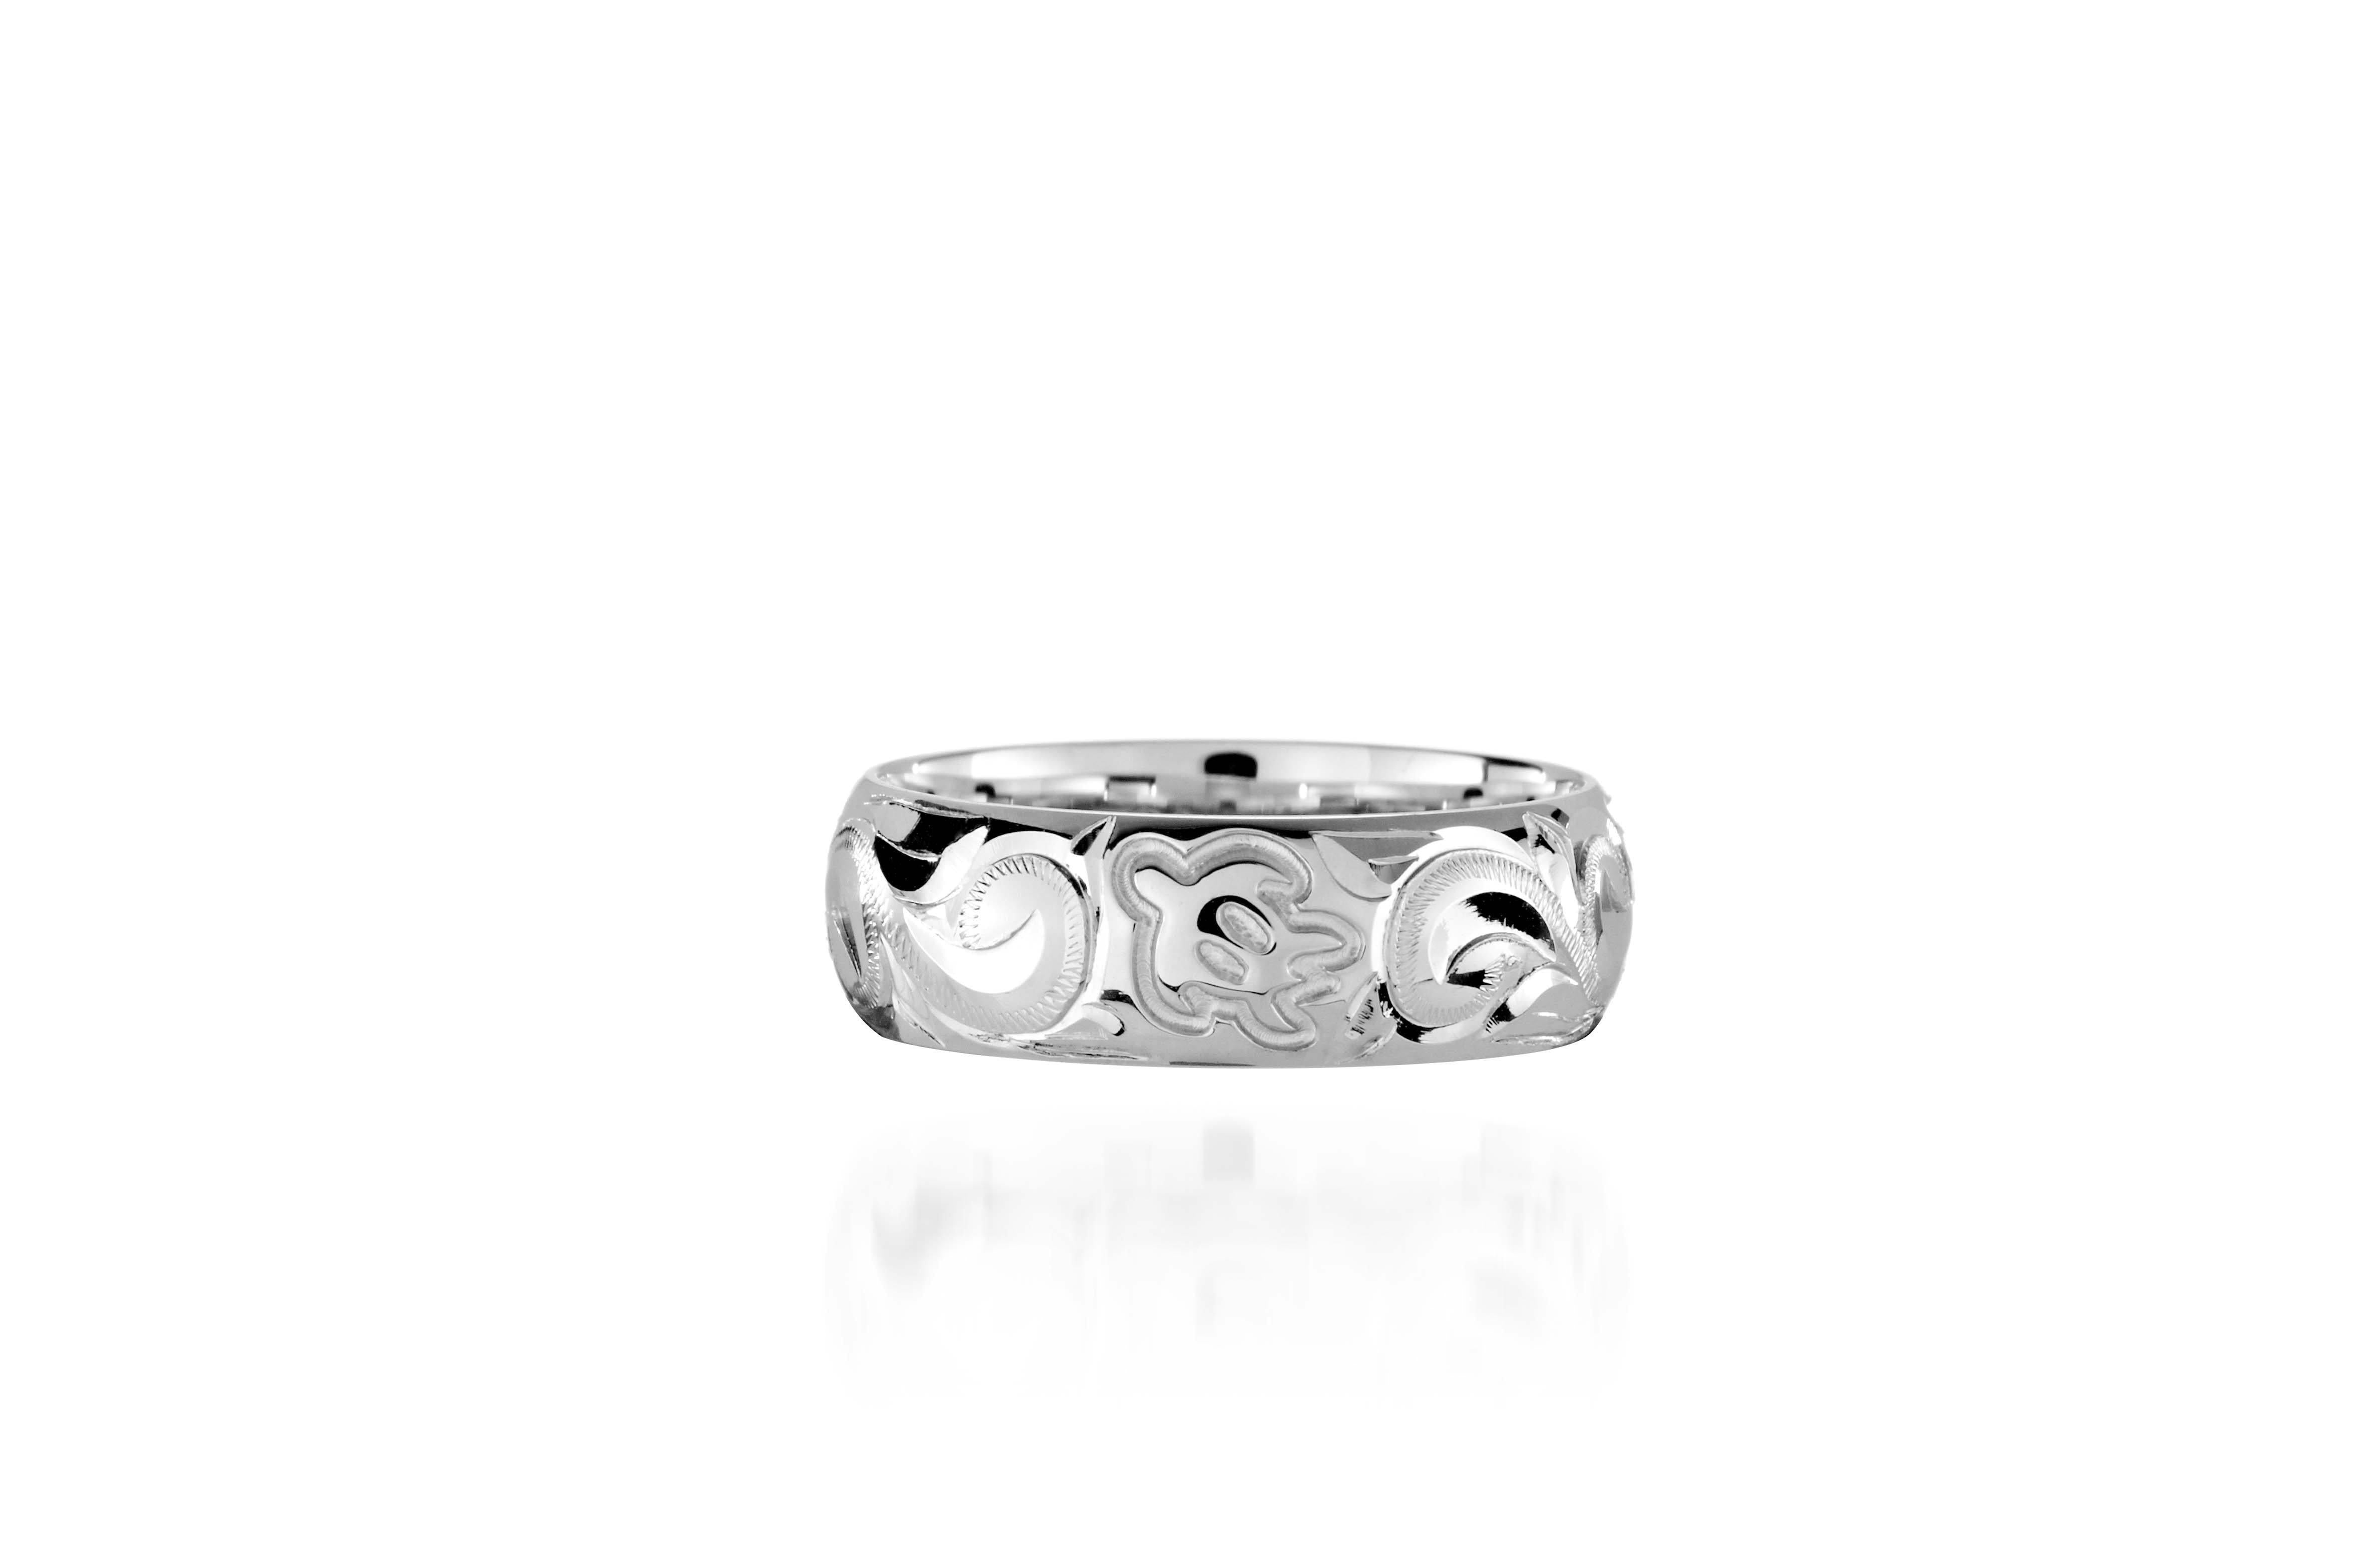 The picture shows a 18K white gold ring 6mm with hand-engravings including a sea turtle.